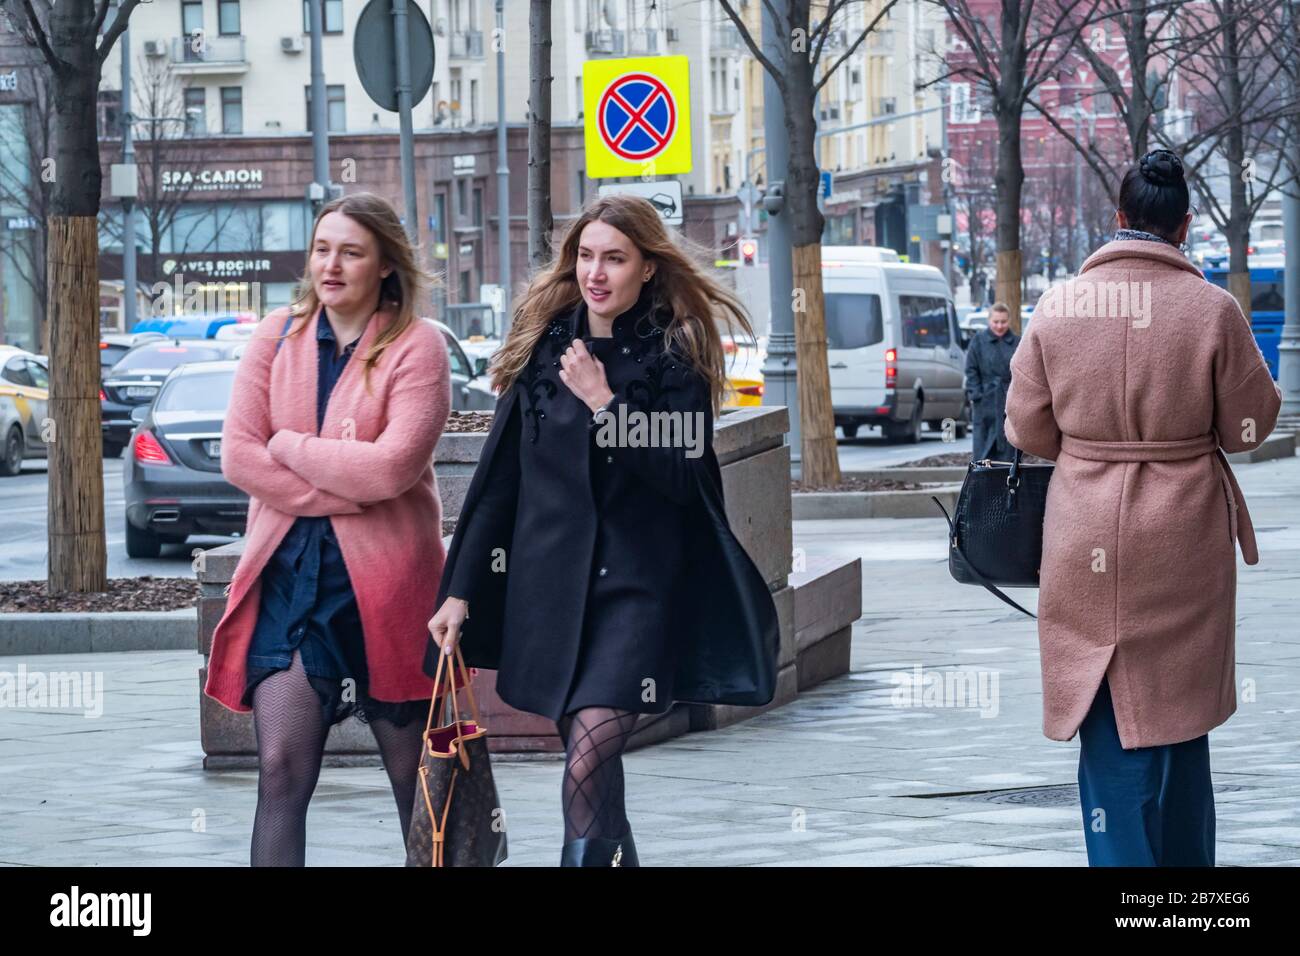 Russia, Moscow. People on the streets of Moscow, Russia. Stock Photo